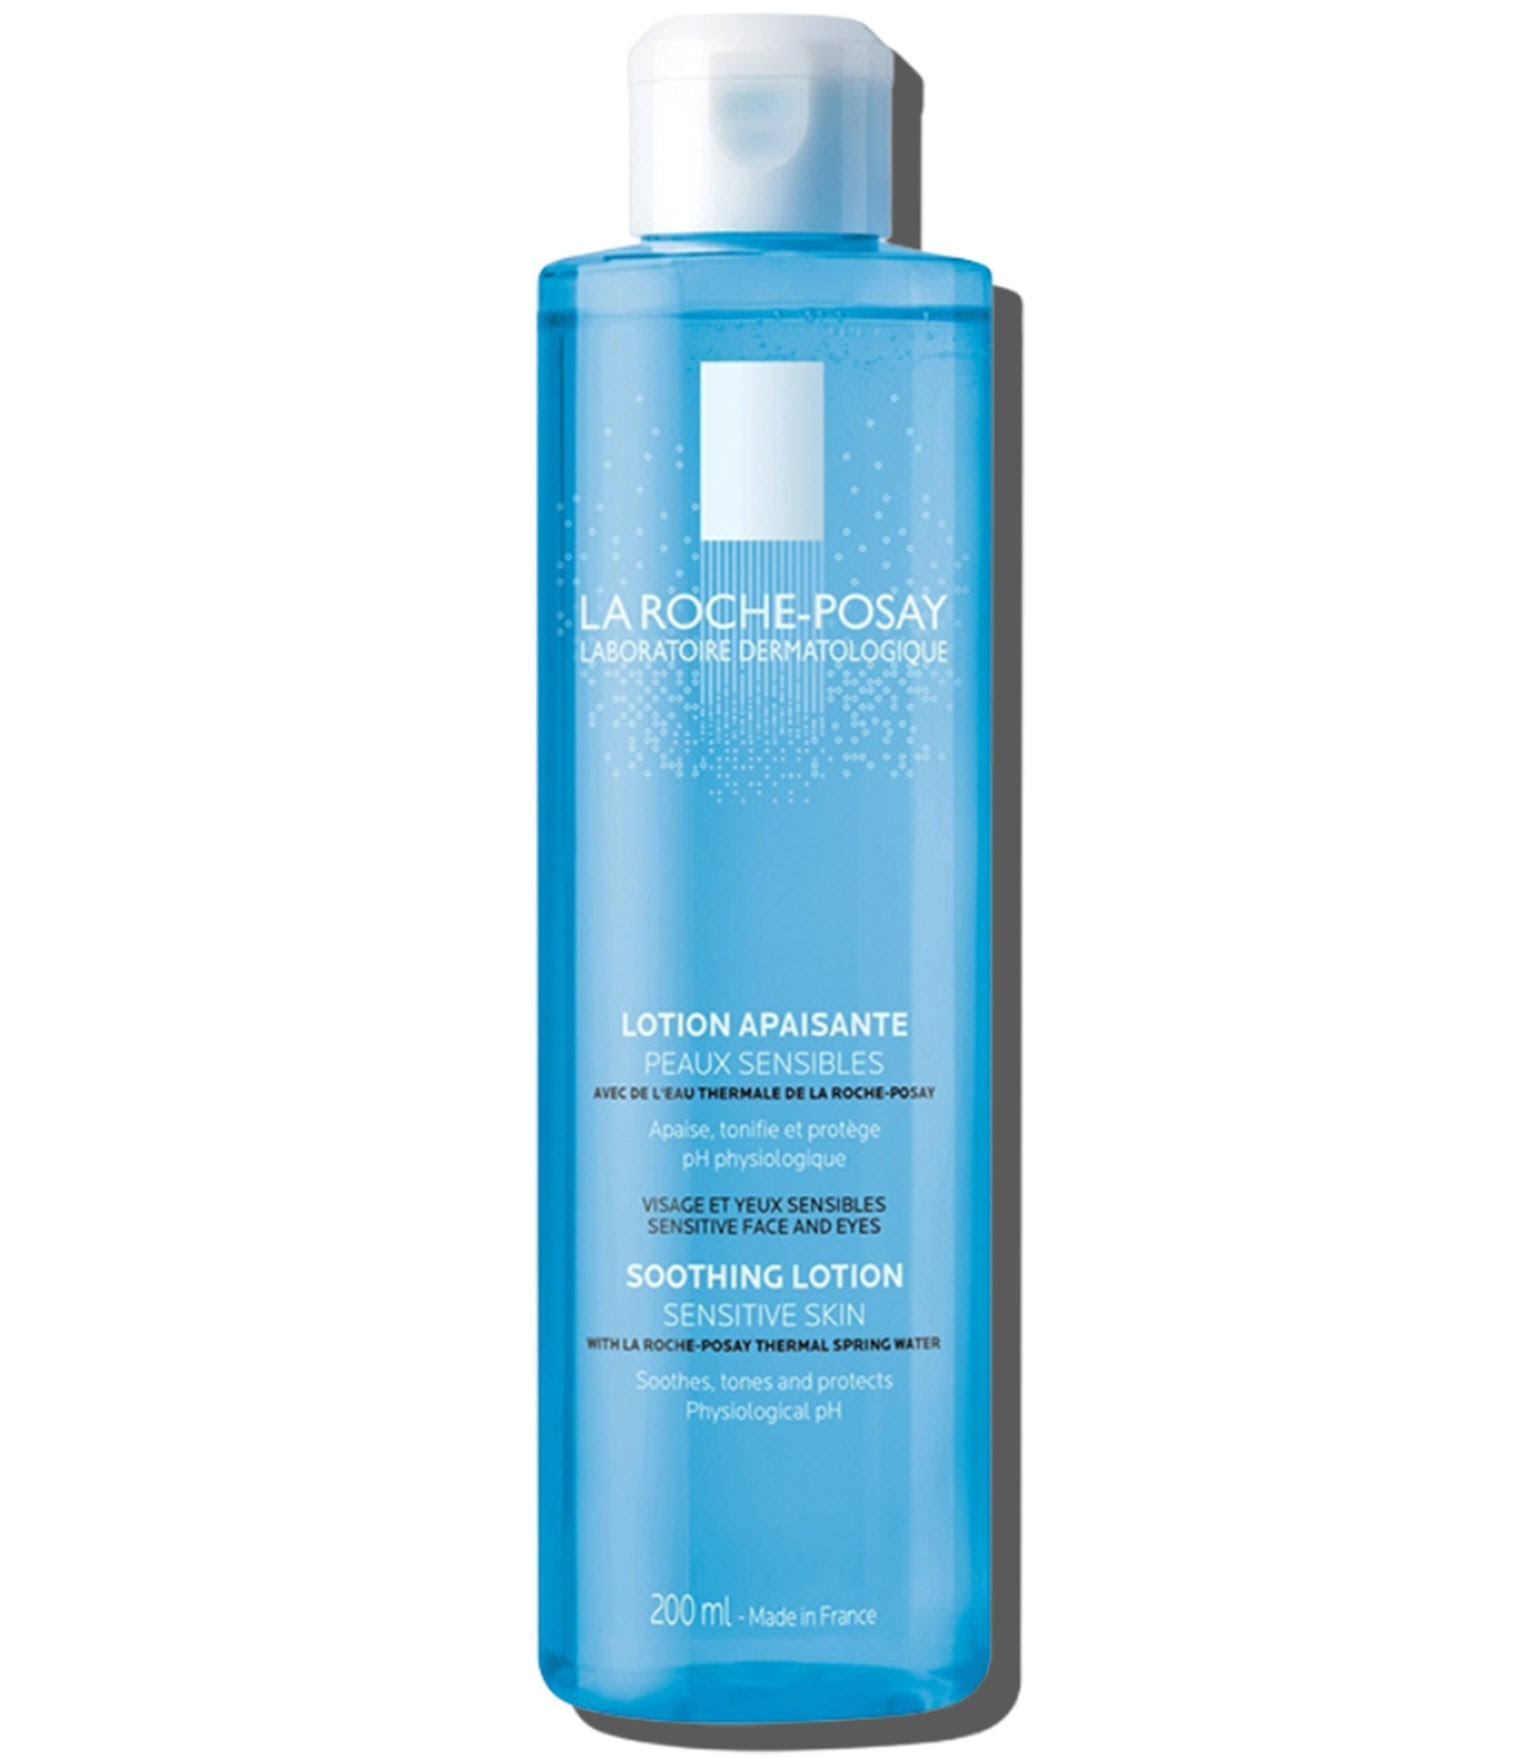 La Roche-Posay Soothing Lotion for Sensitive Skin - 200ml